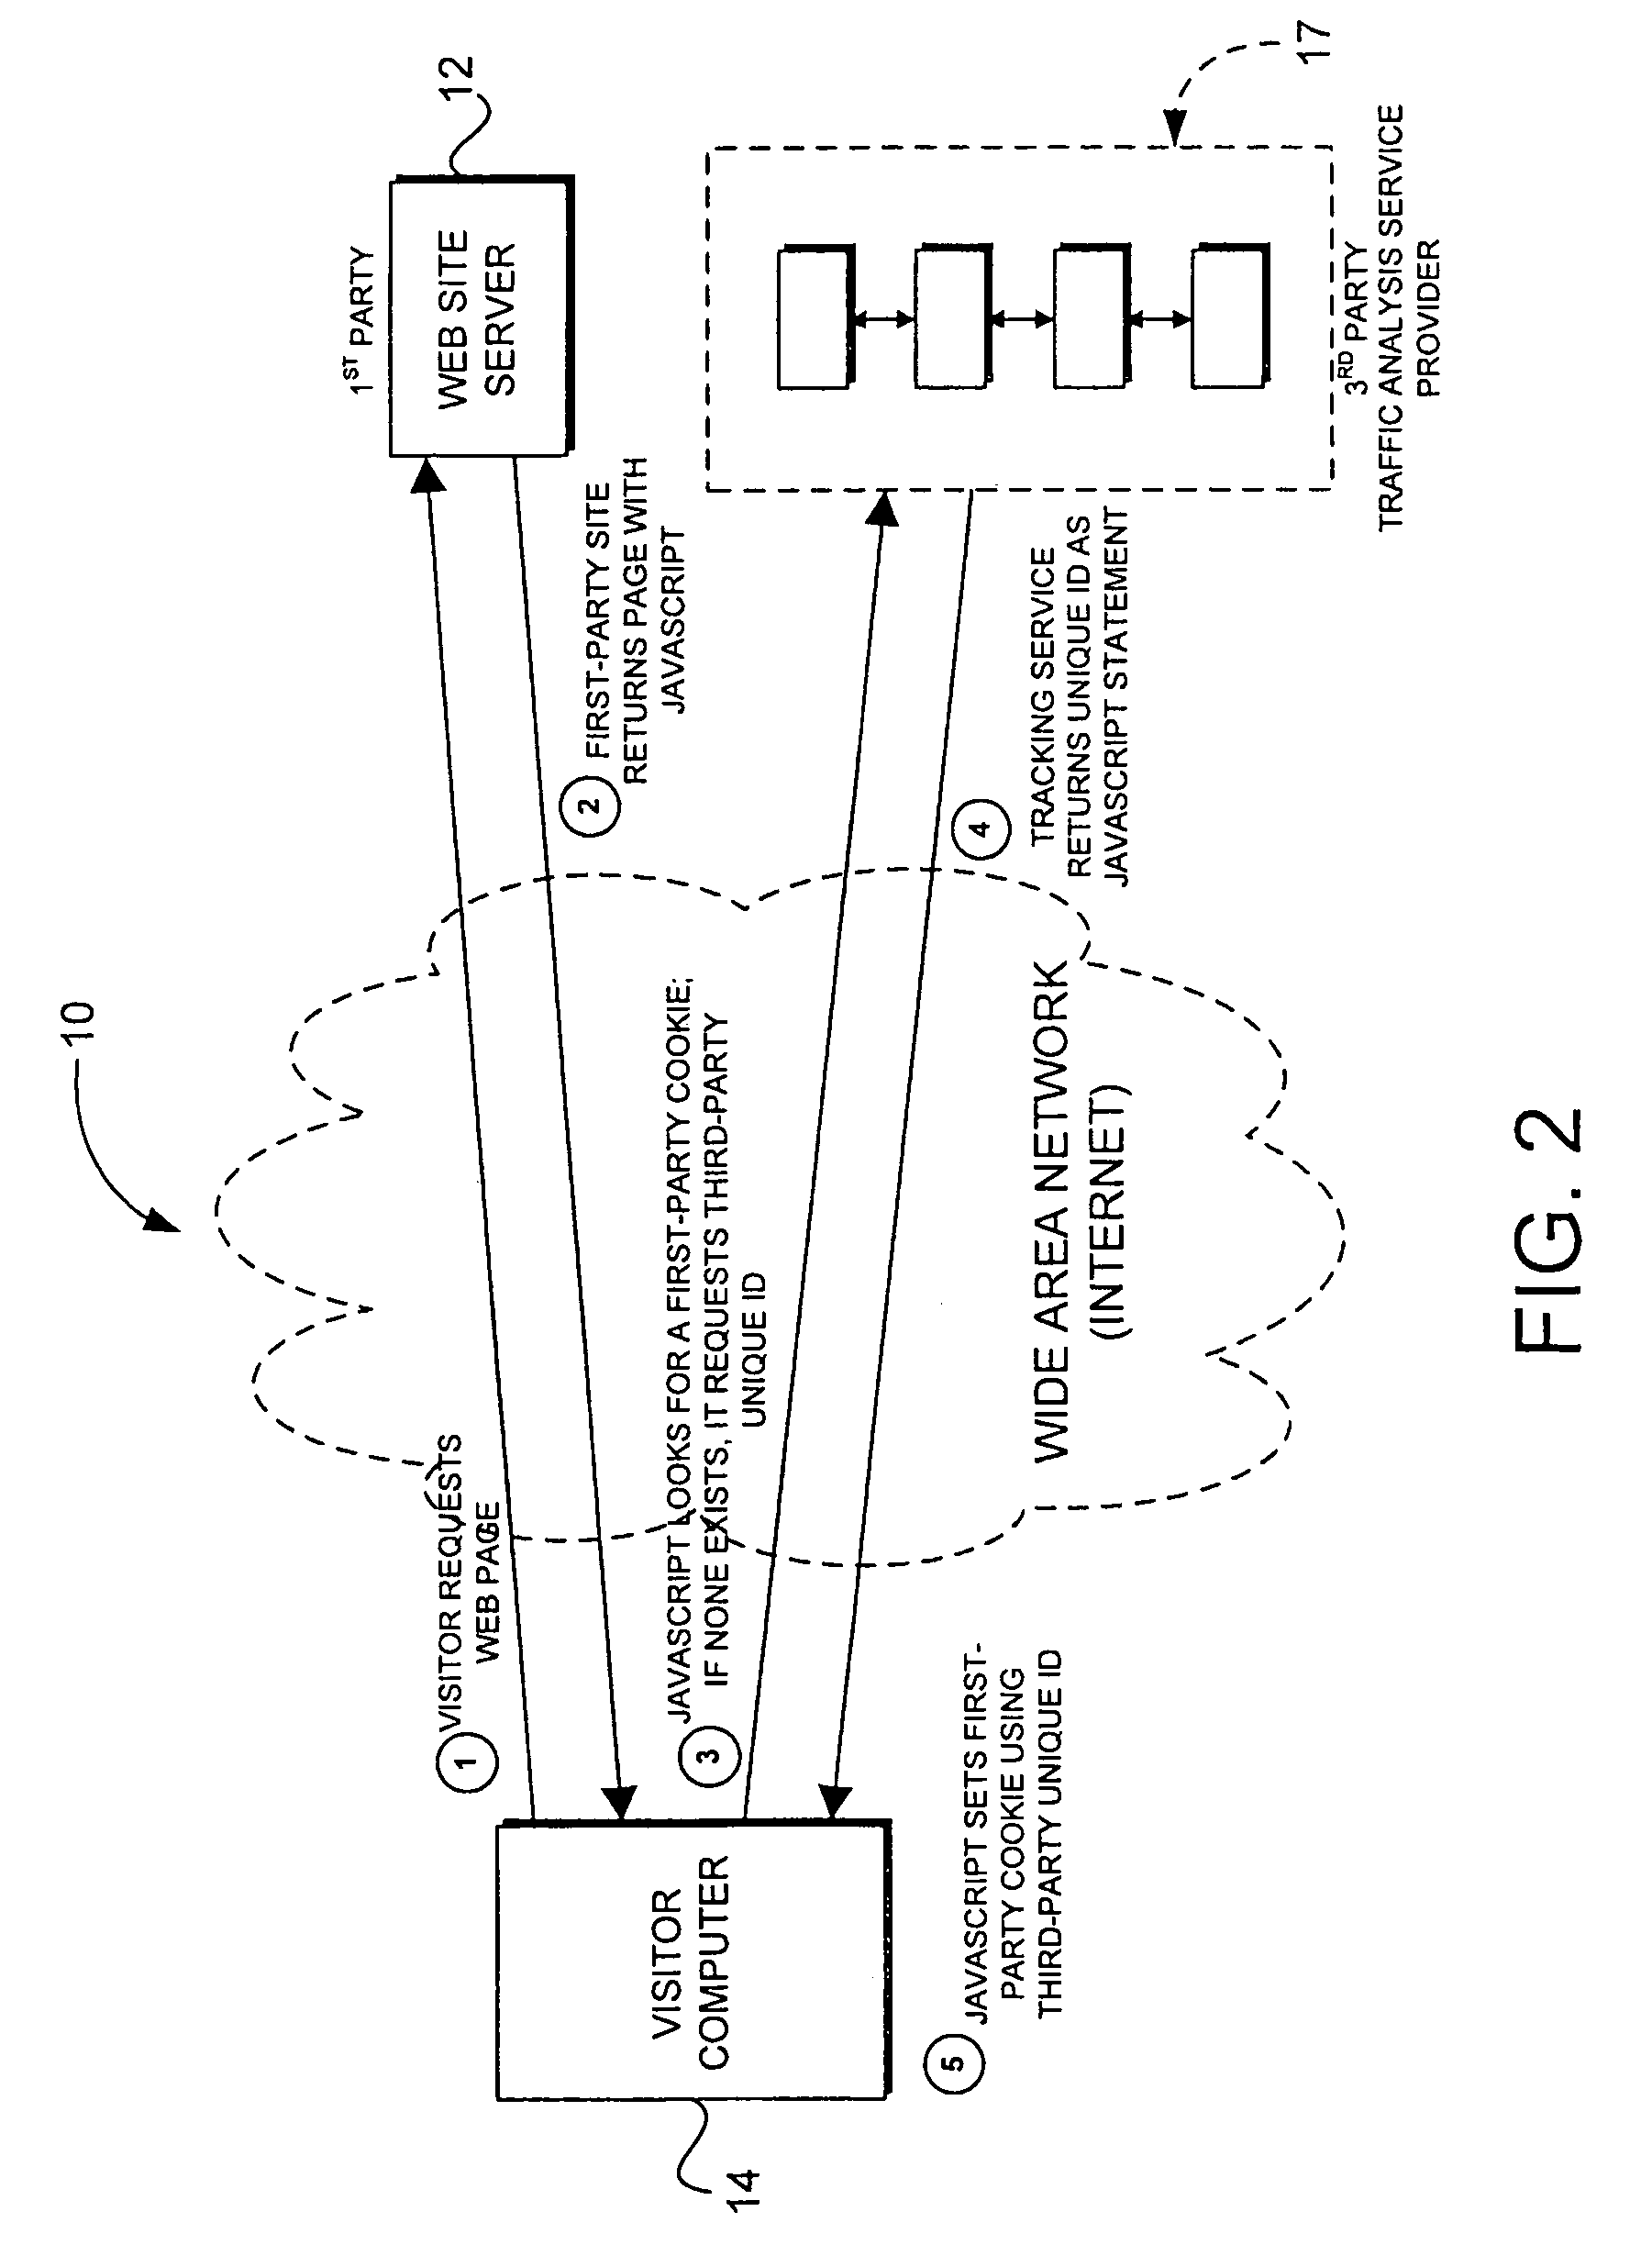 Method for cross-domain tracking of web site traffic